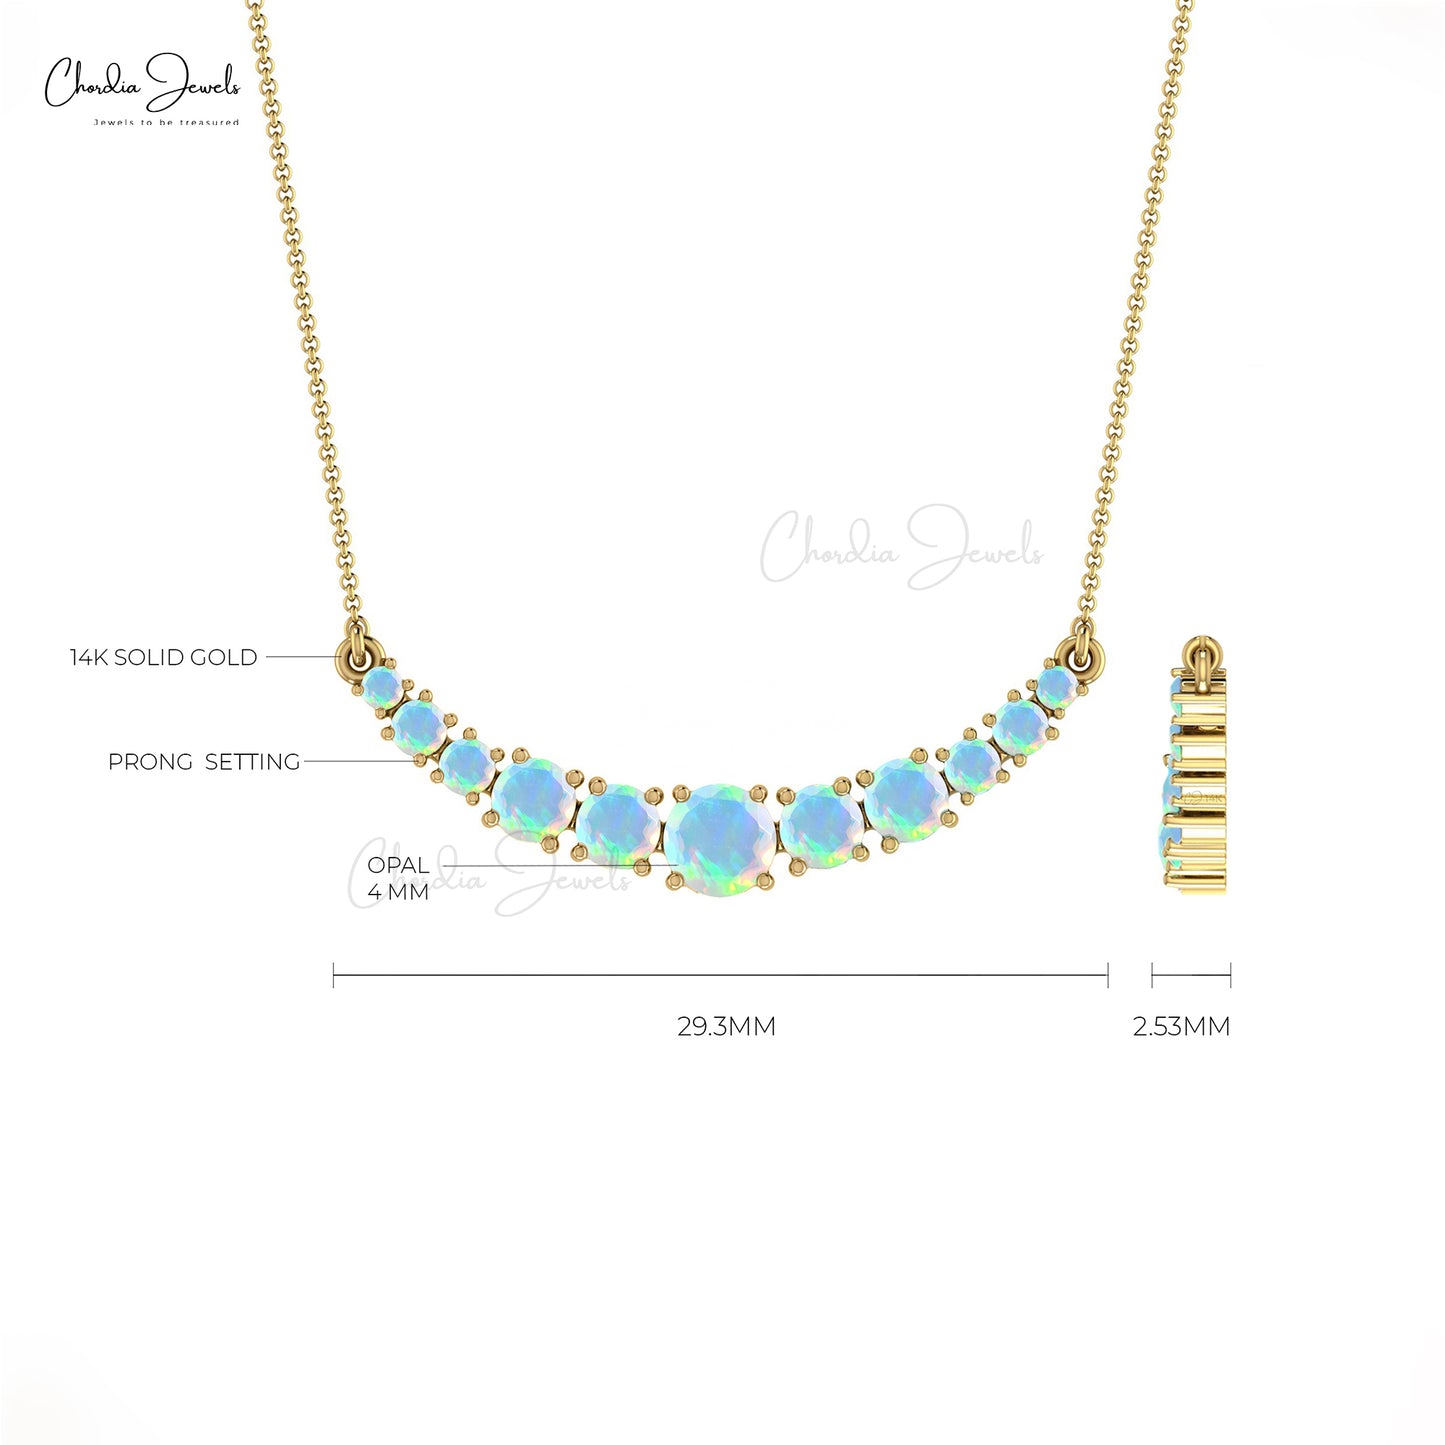 Load image into Gallery viewer, 14k Solid Gold Round Gemstone Necklace, 0.66 Carat Natural Ethiopian Opal Necklace, October Birthstone Handmade Necklace Gift for Her
